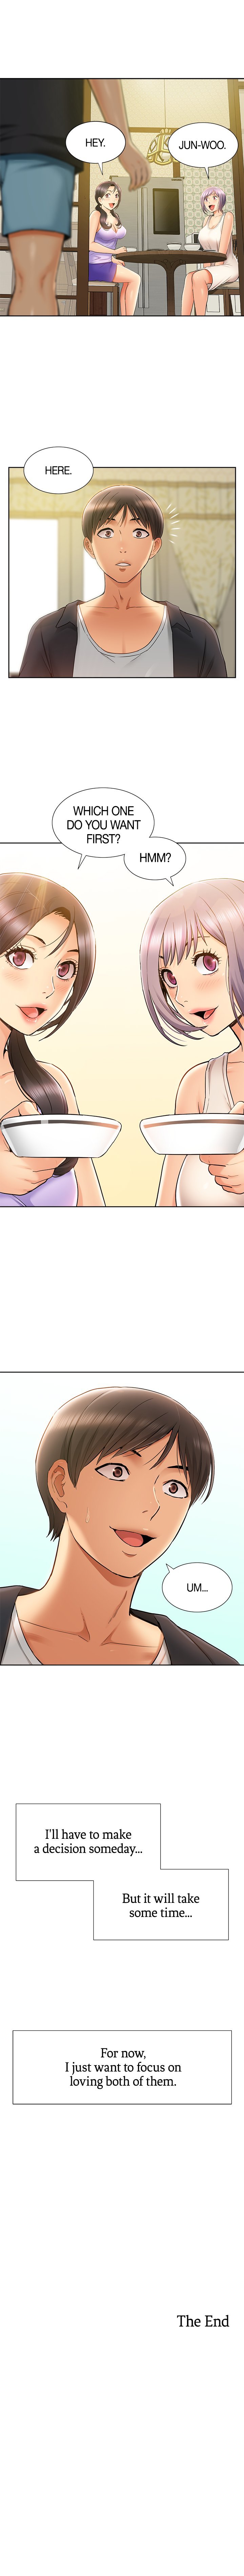 young-mom-and-daughter-chap-32-19